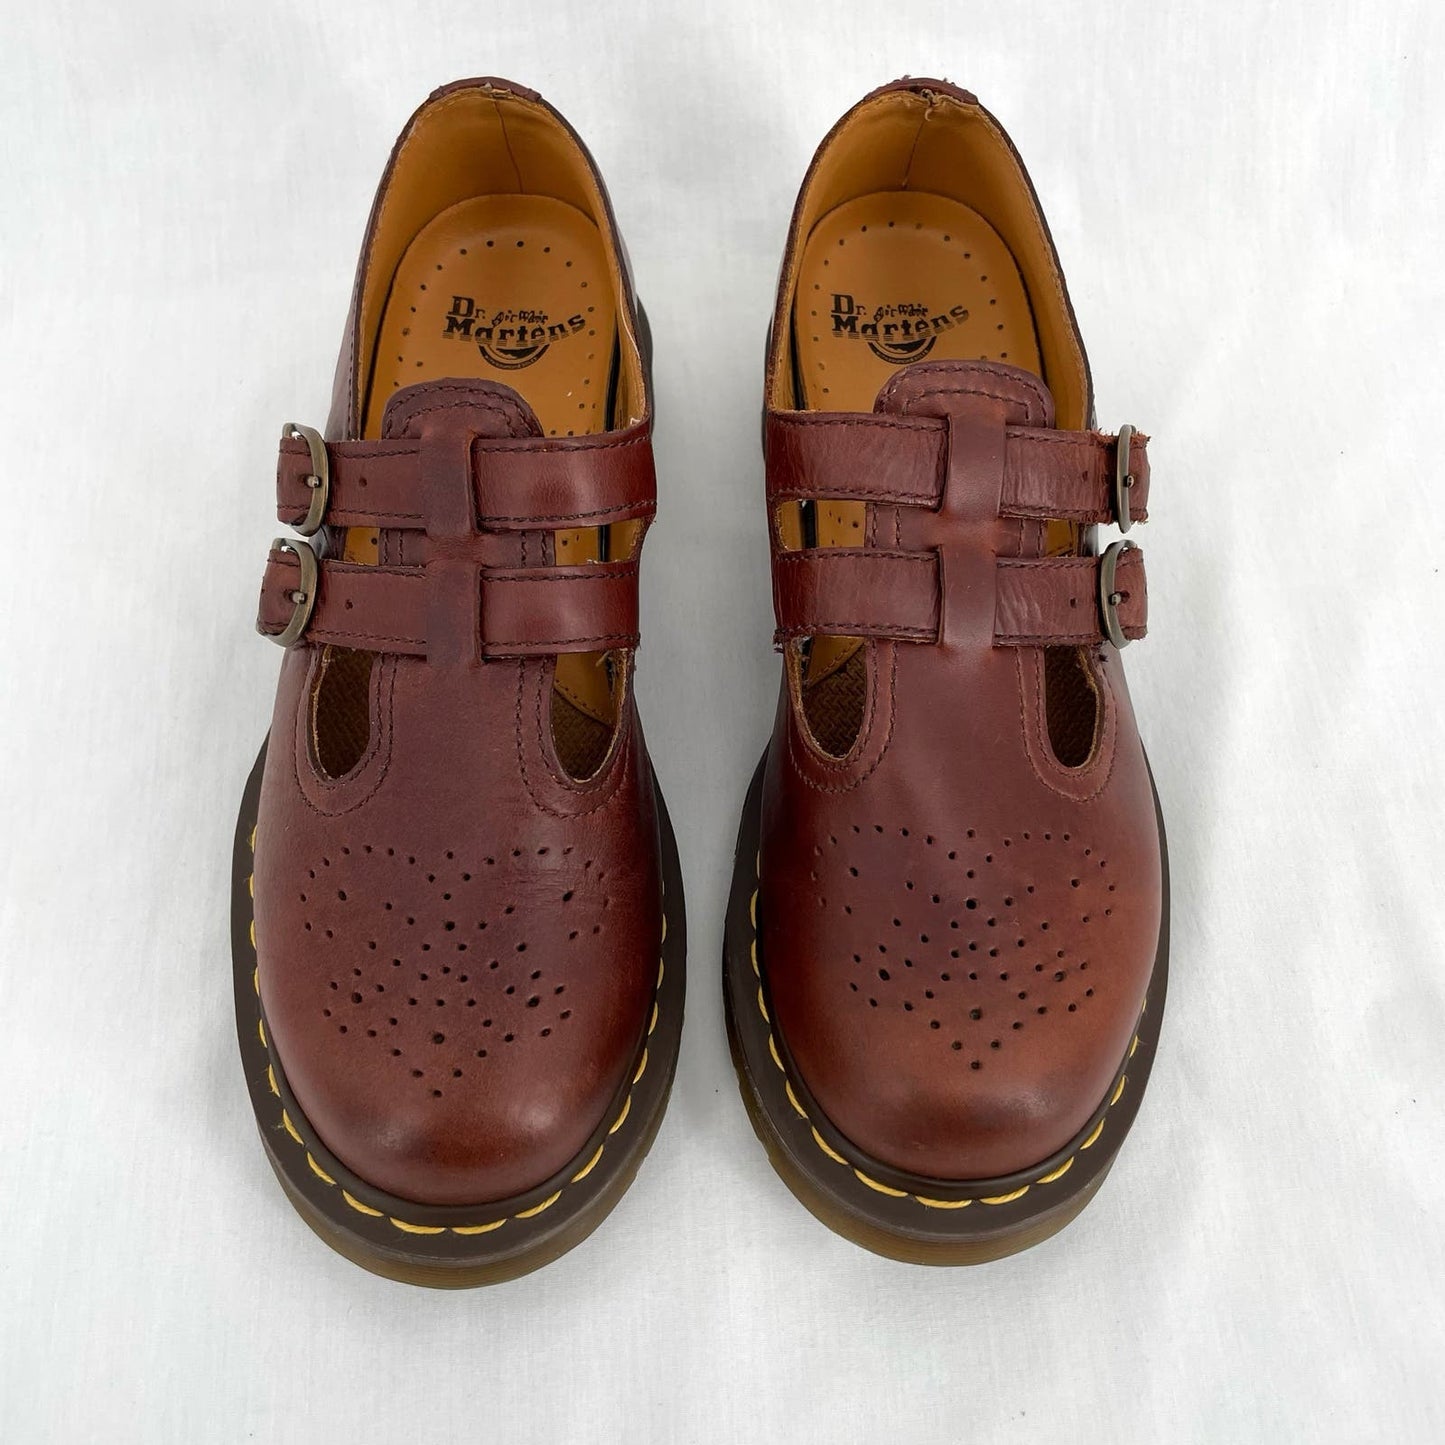 Dr. Martens Mary Jane Brown Smooth Leather Double Buckle Oxford Classic Shoes Size 8